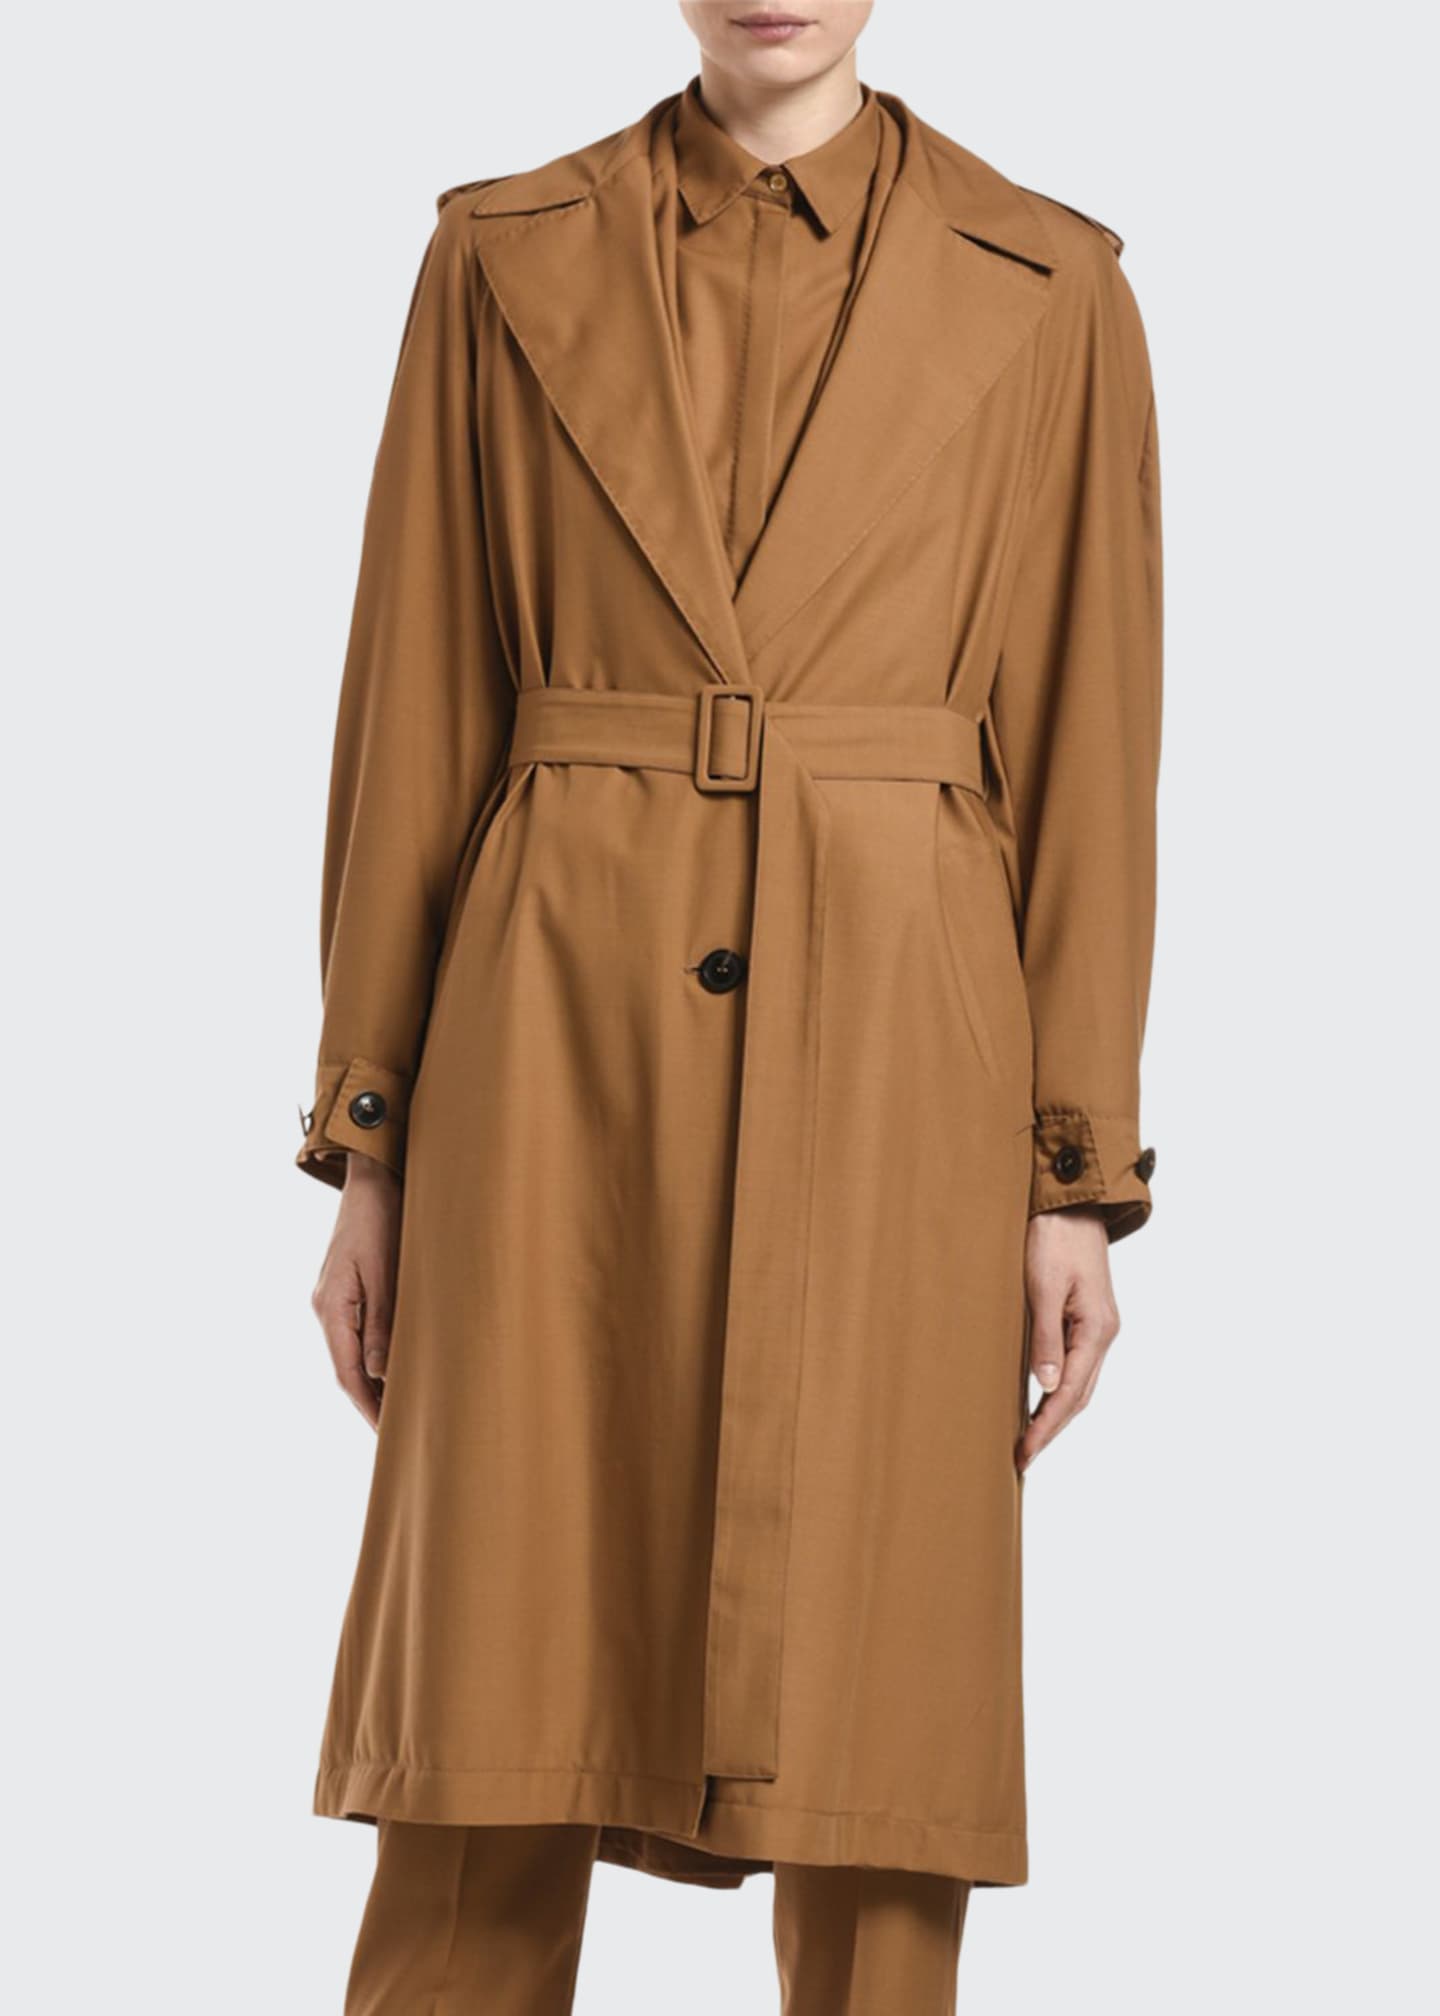 Gucci Wool Coat with Double-G